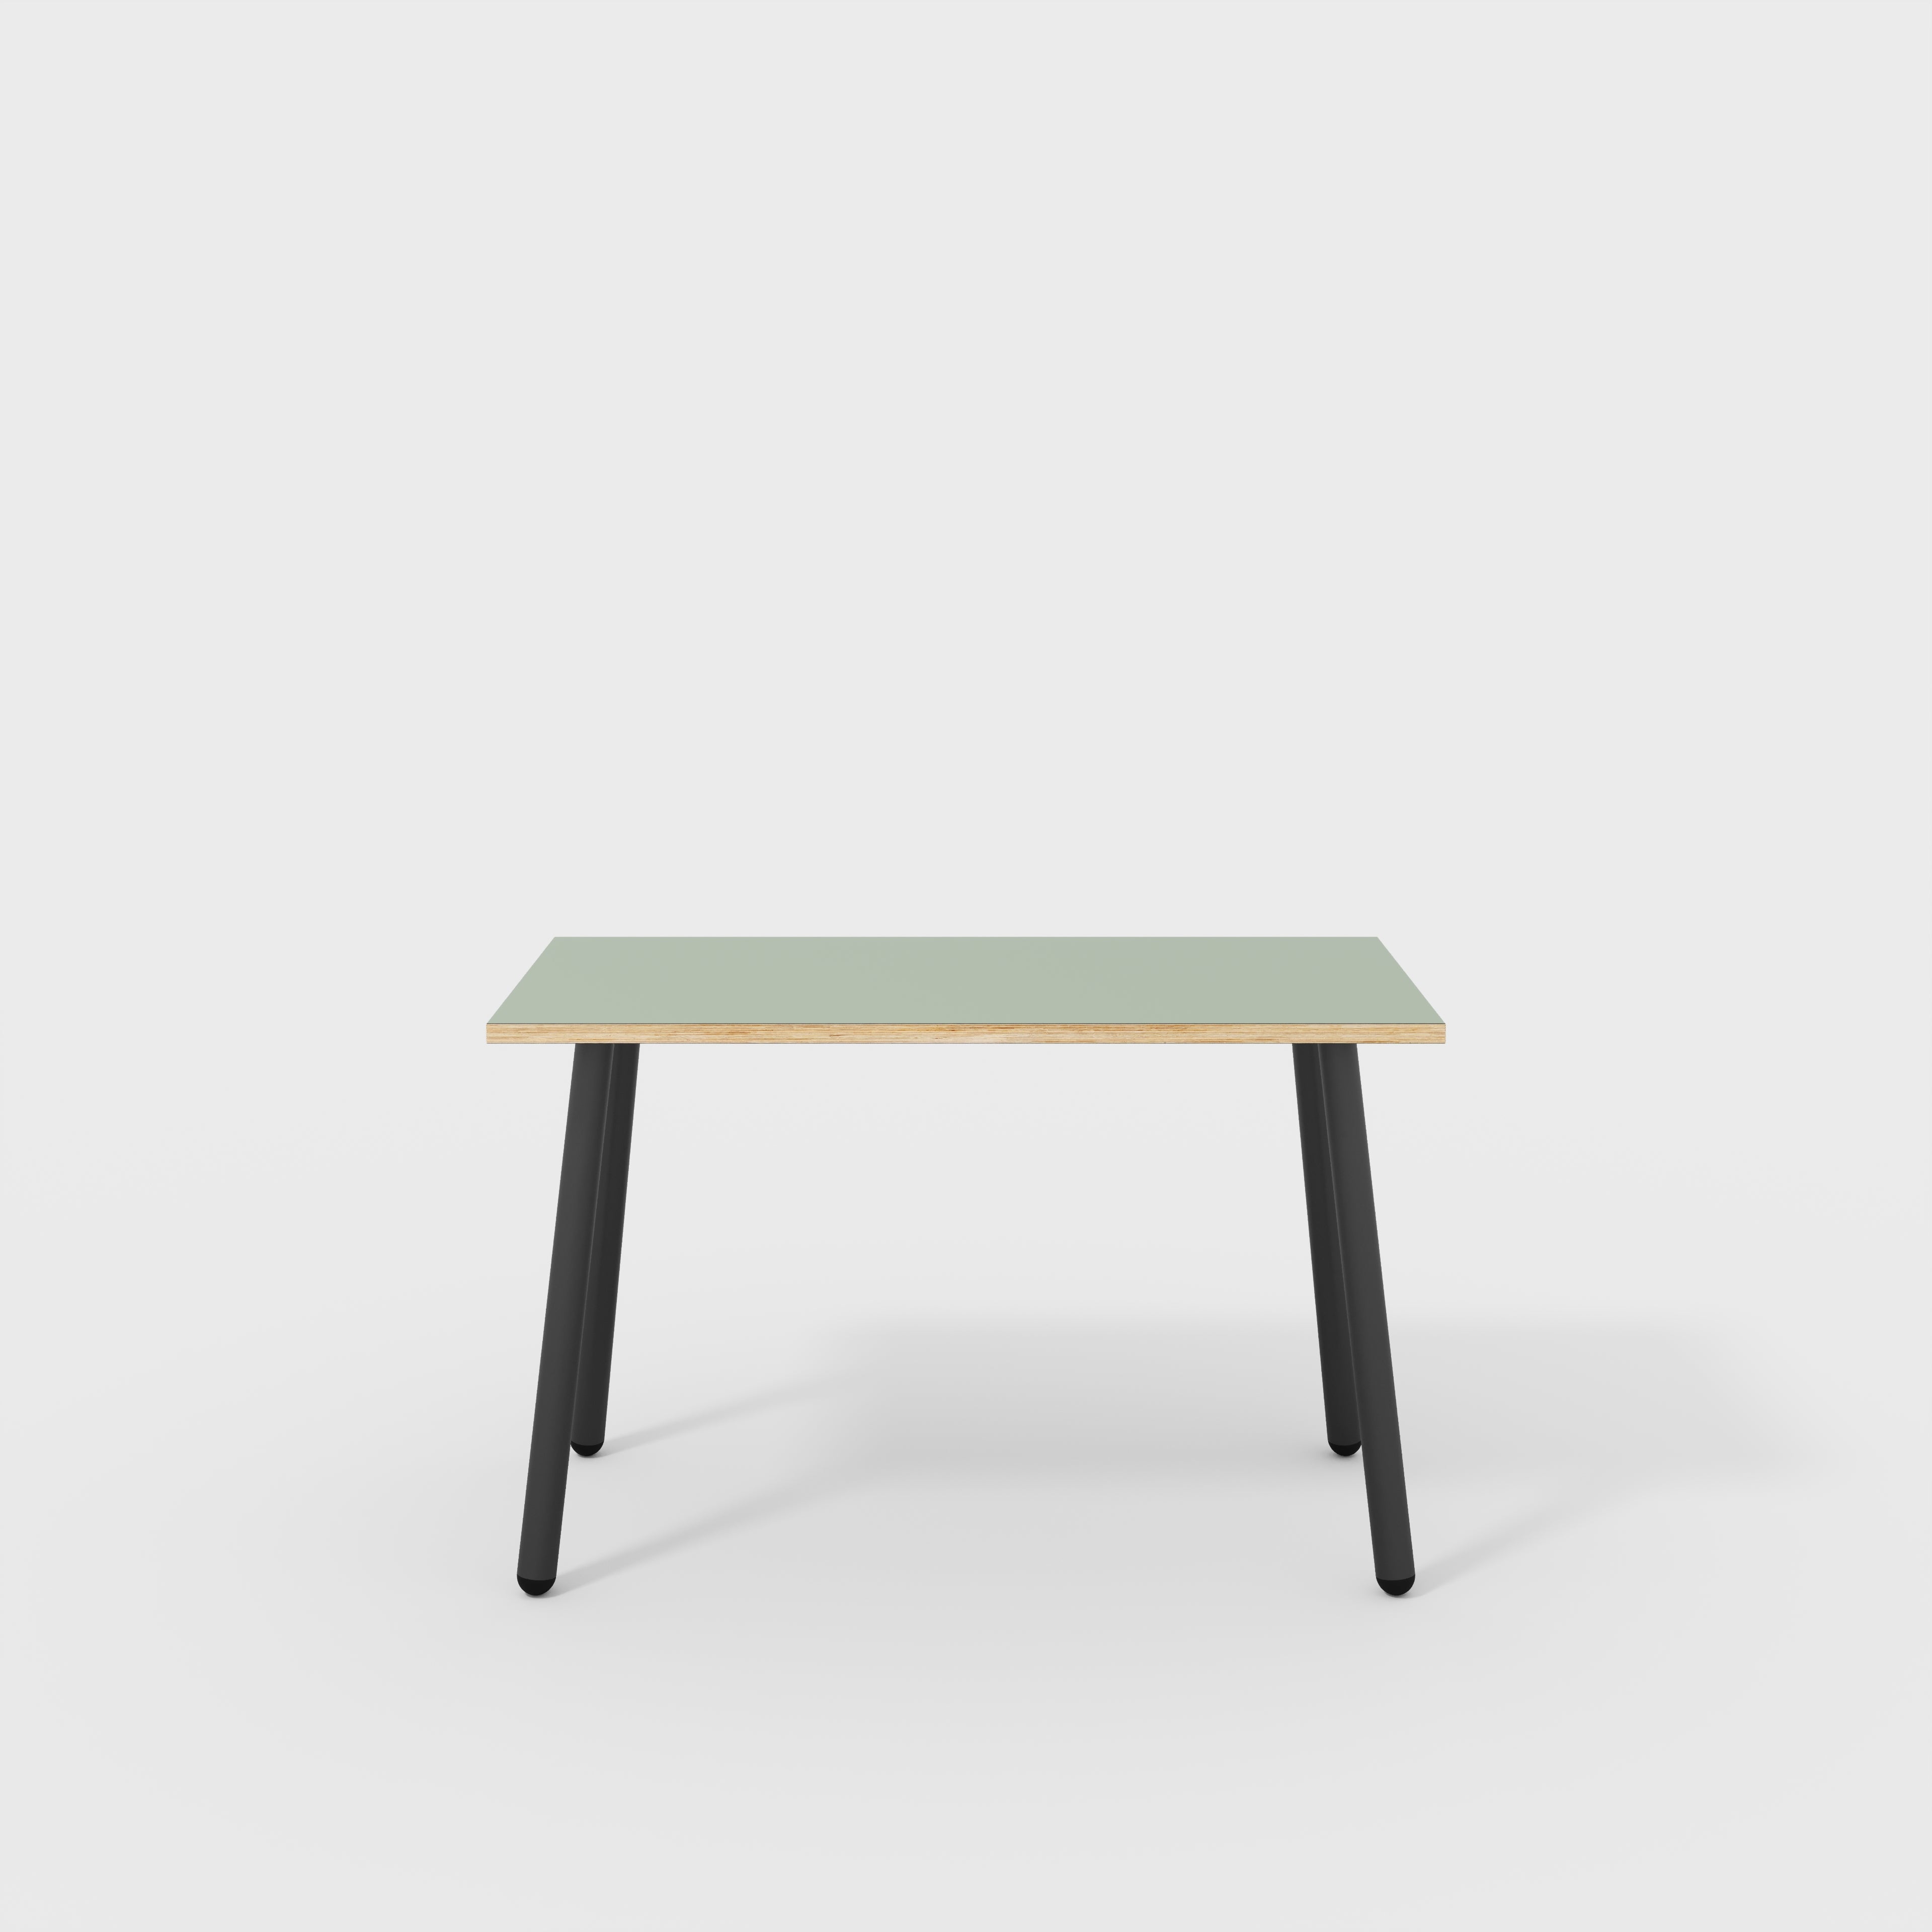 Desk with Black Round Single Pin Legs - Formica Green Slate - 1200(w) x 600(d) x 735(h)